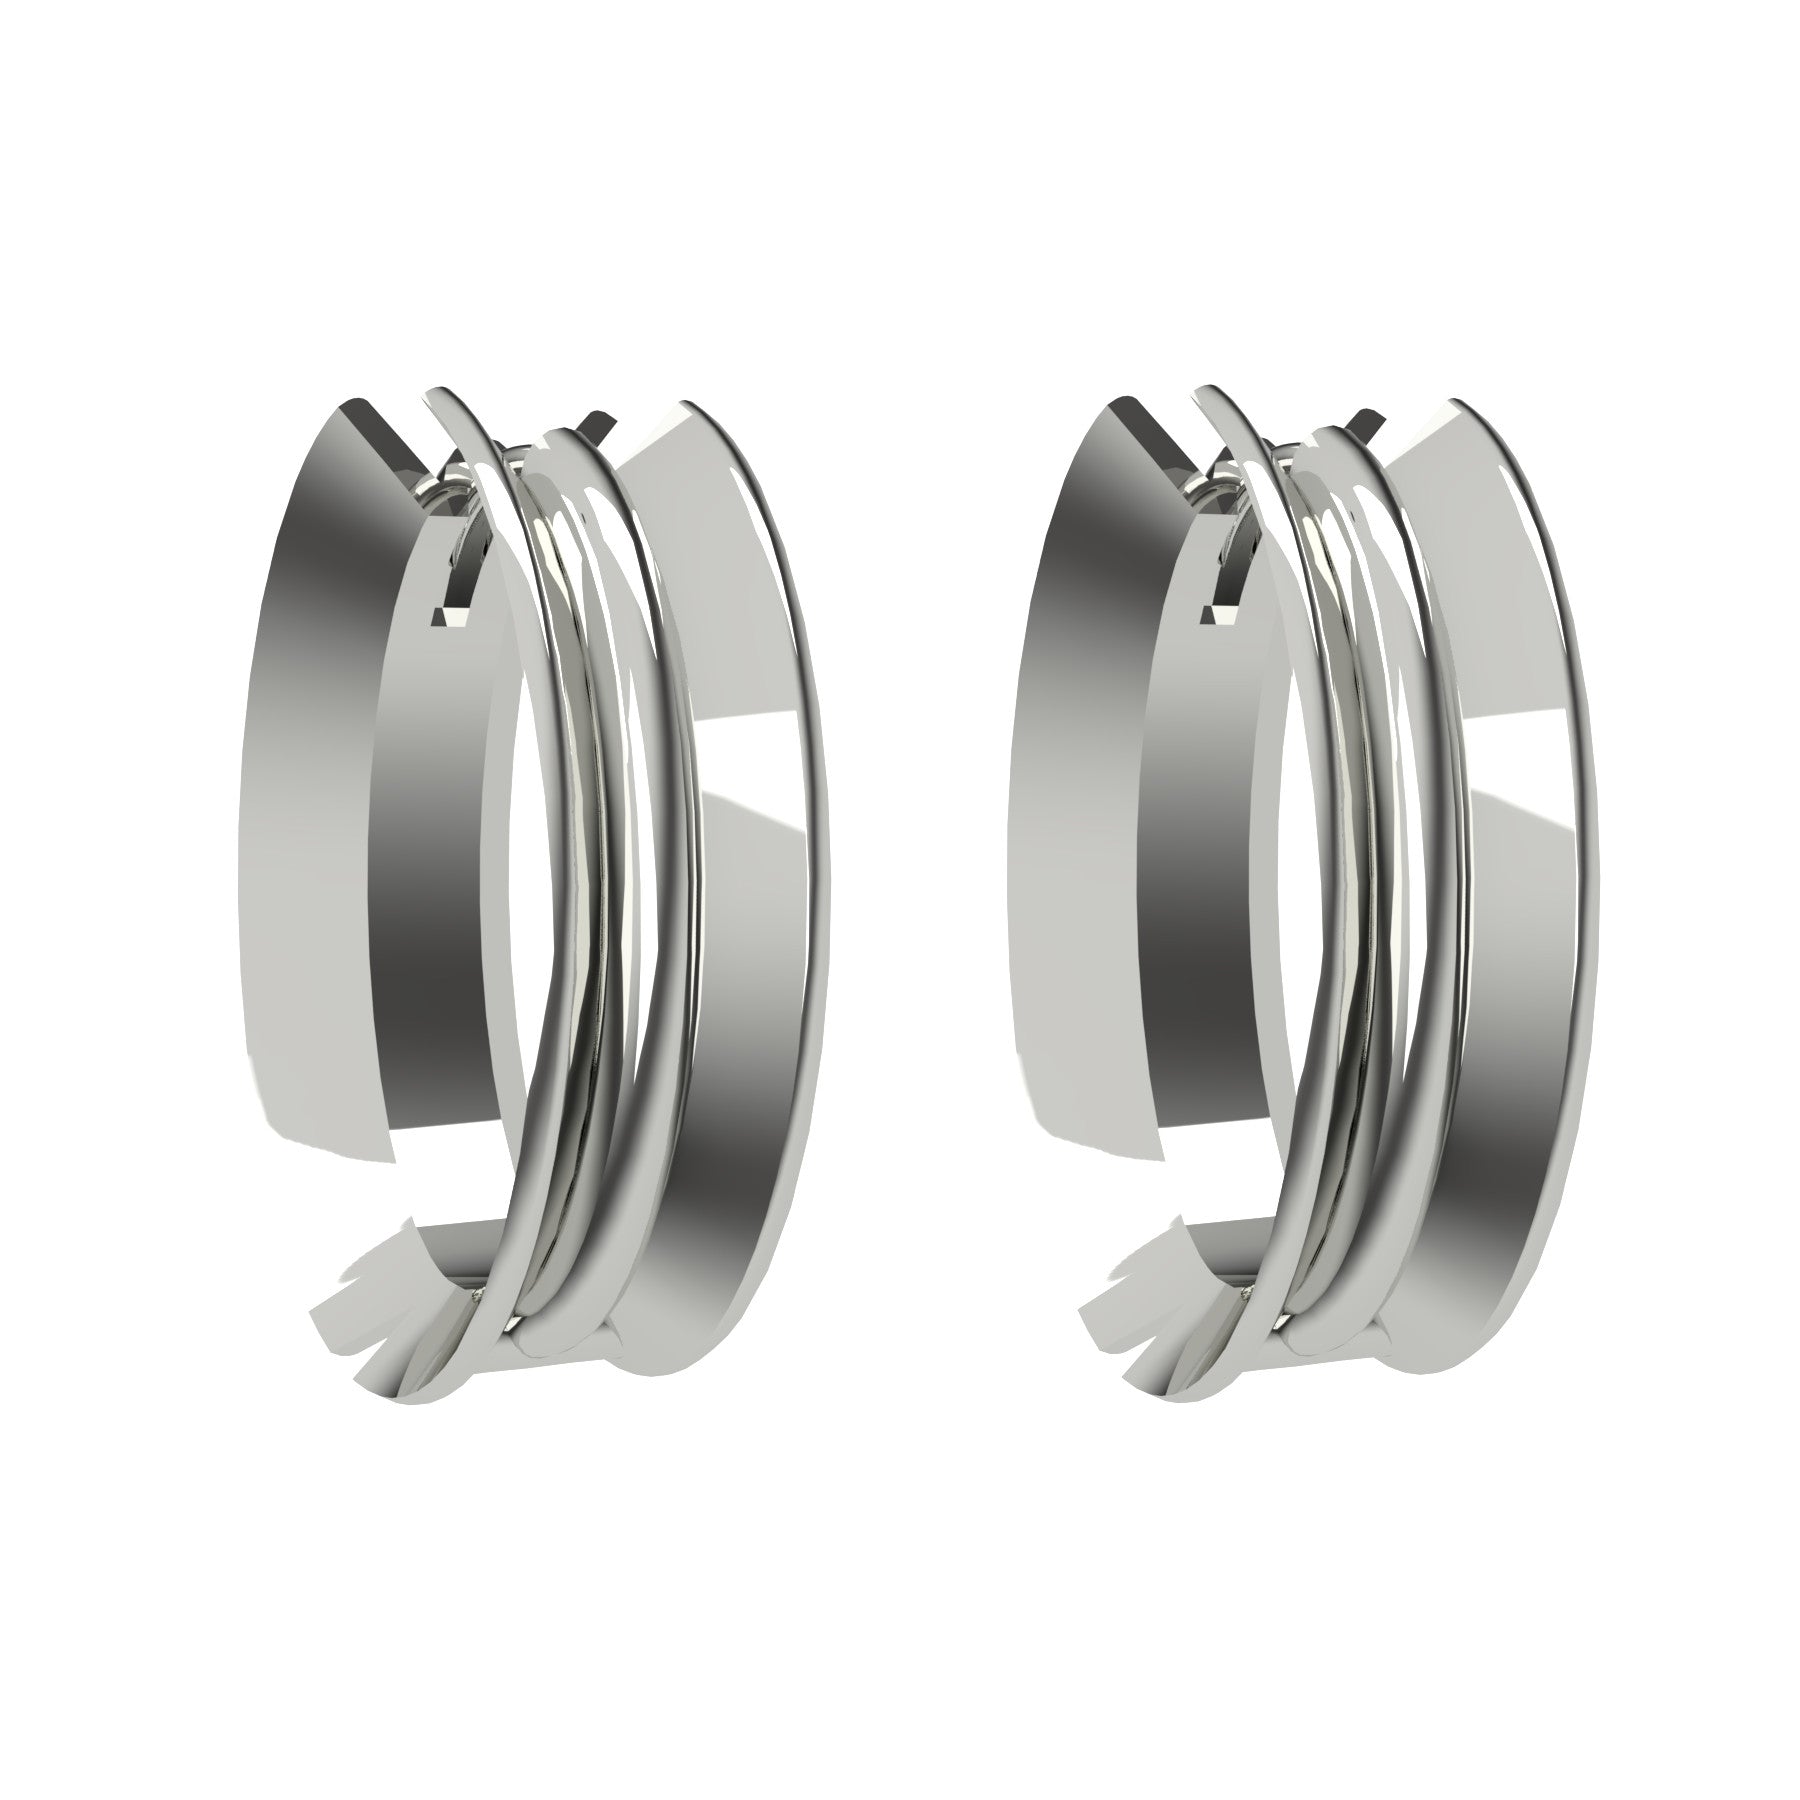 bobo oval earrings, sterling silver, weight about 7,0 g (0.24 oz), size 23,5x13,8x8 mm 